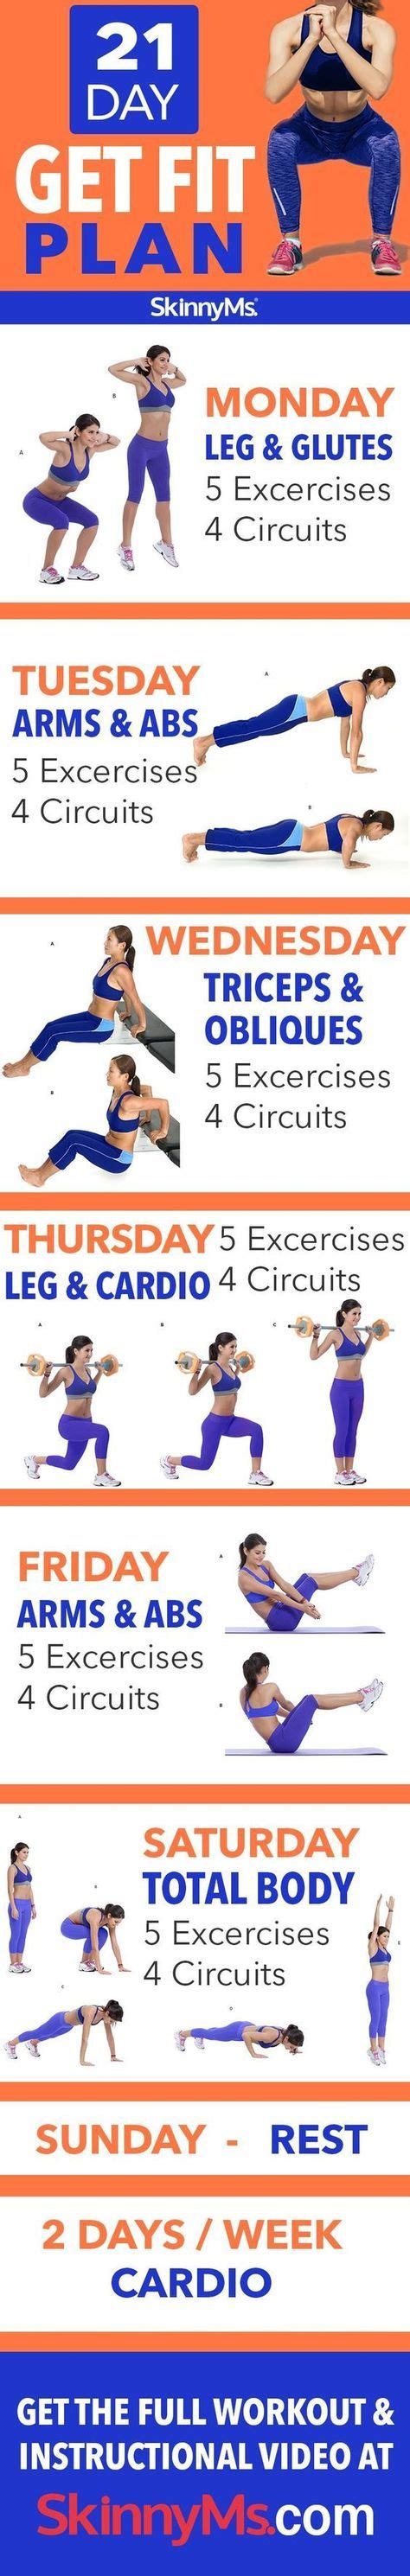 21 Day Get Fit Plan With Images Workout Plan Bodyweight Workout